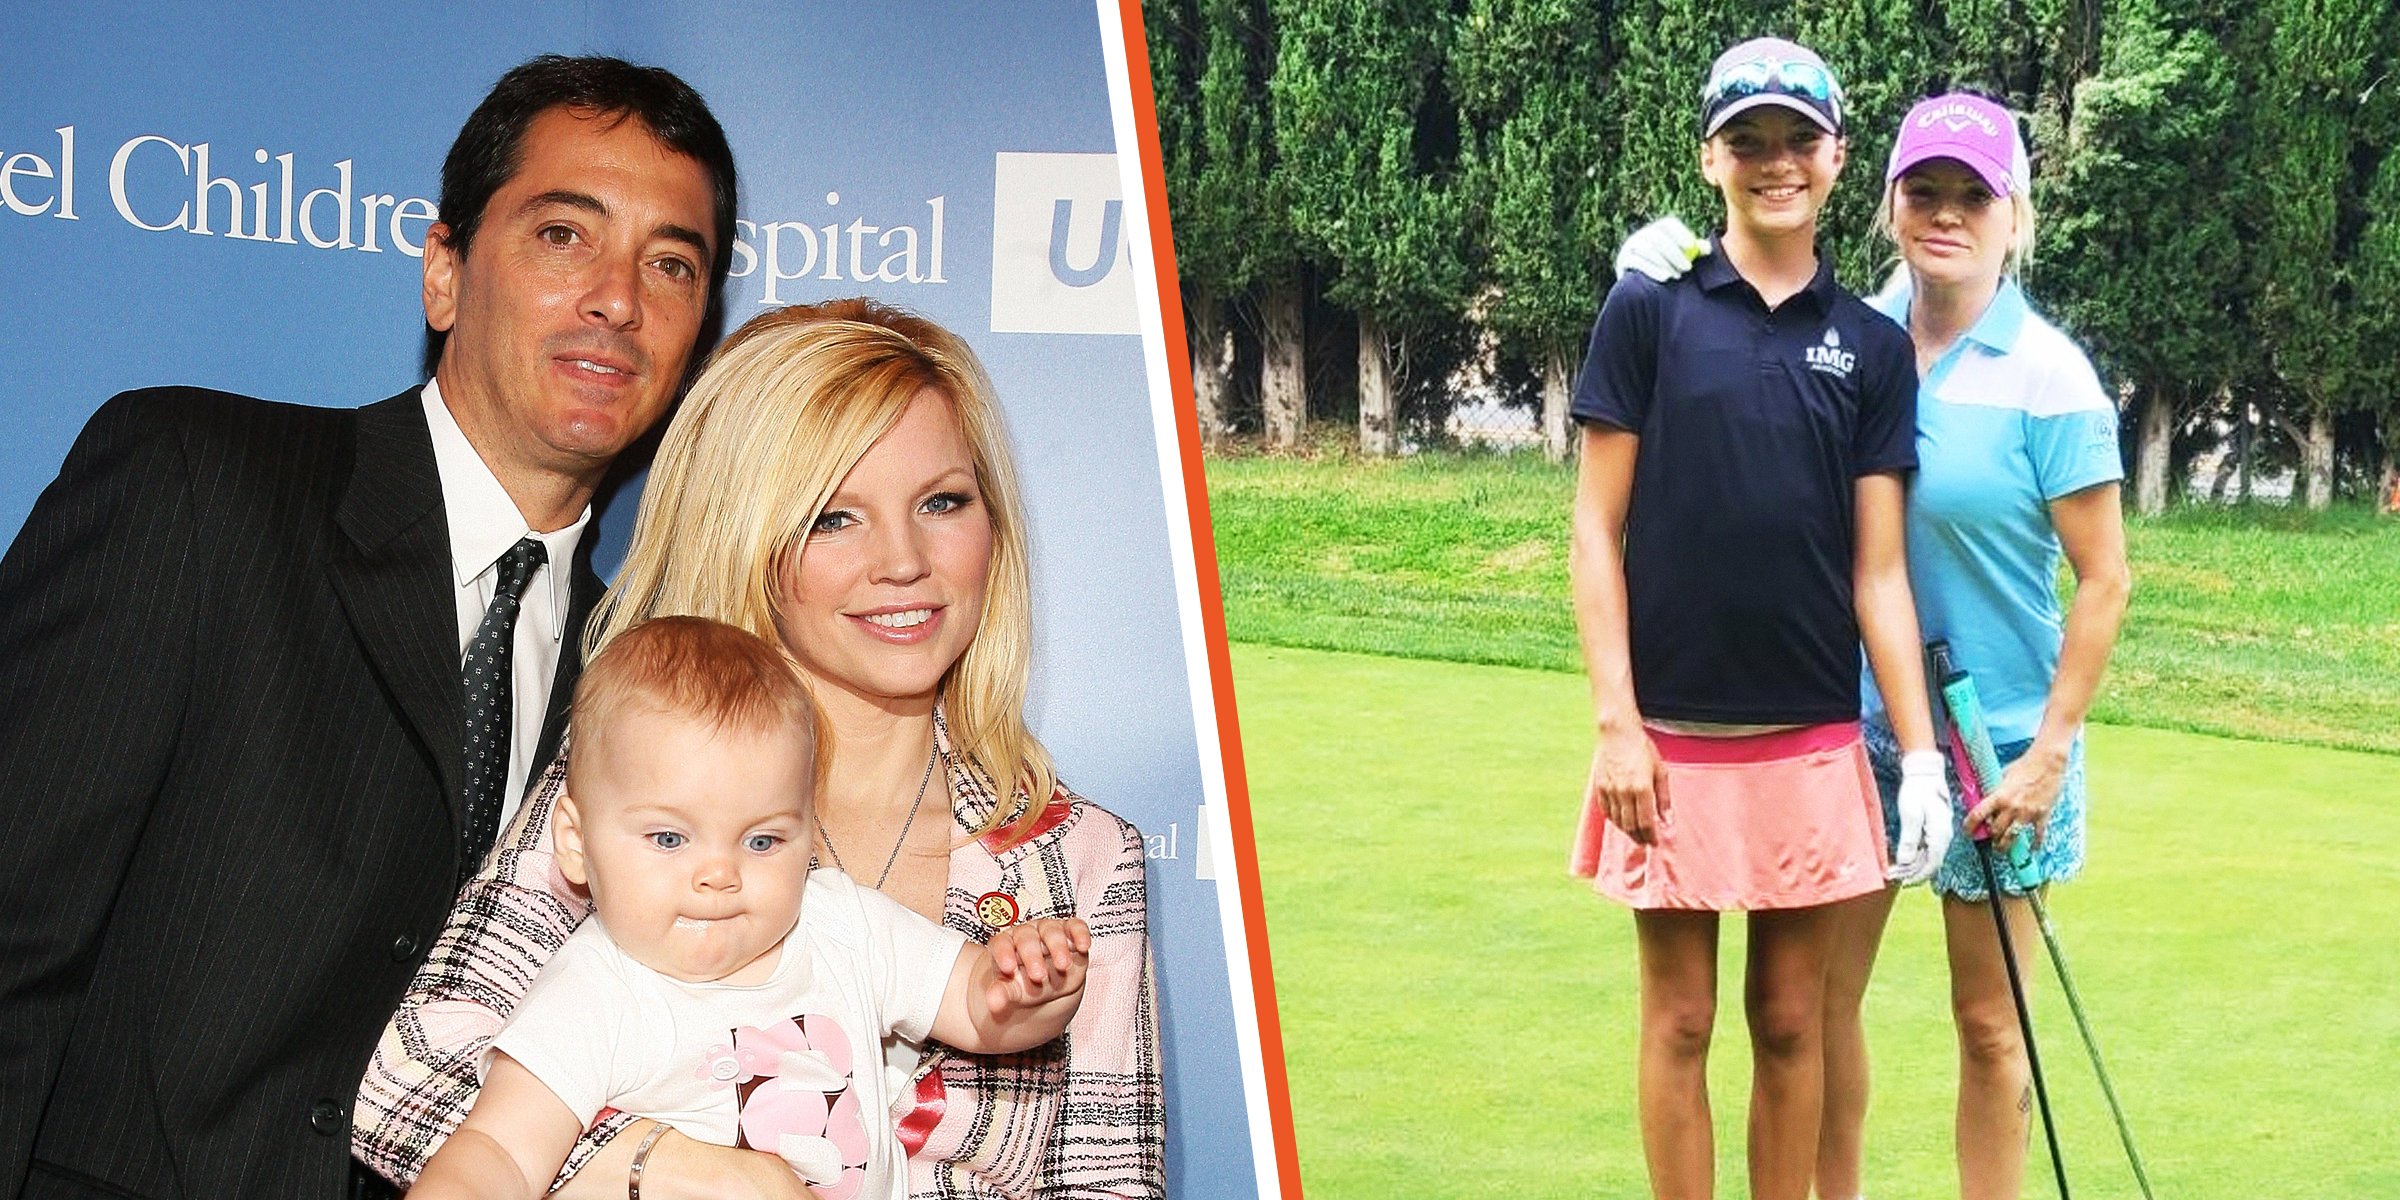 Scott Baio, his wife Renee and daughter Bailey. | Source: Getty Images